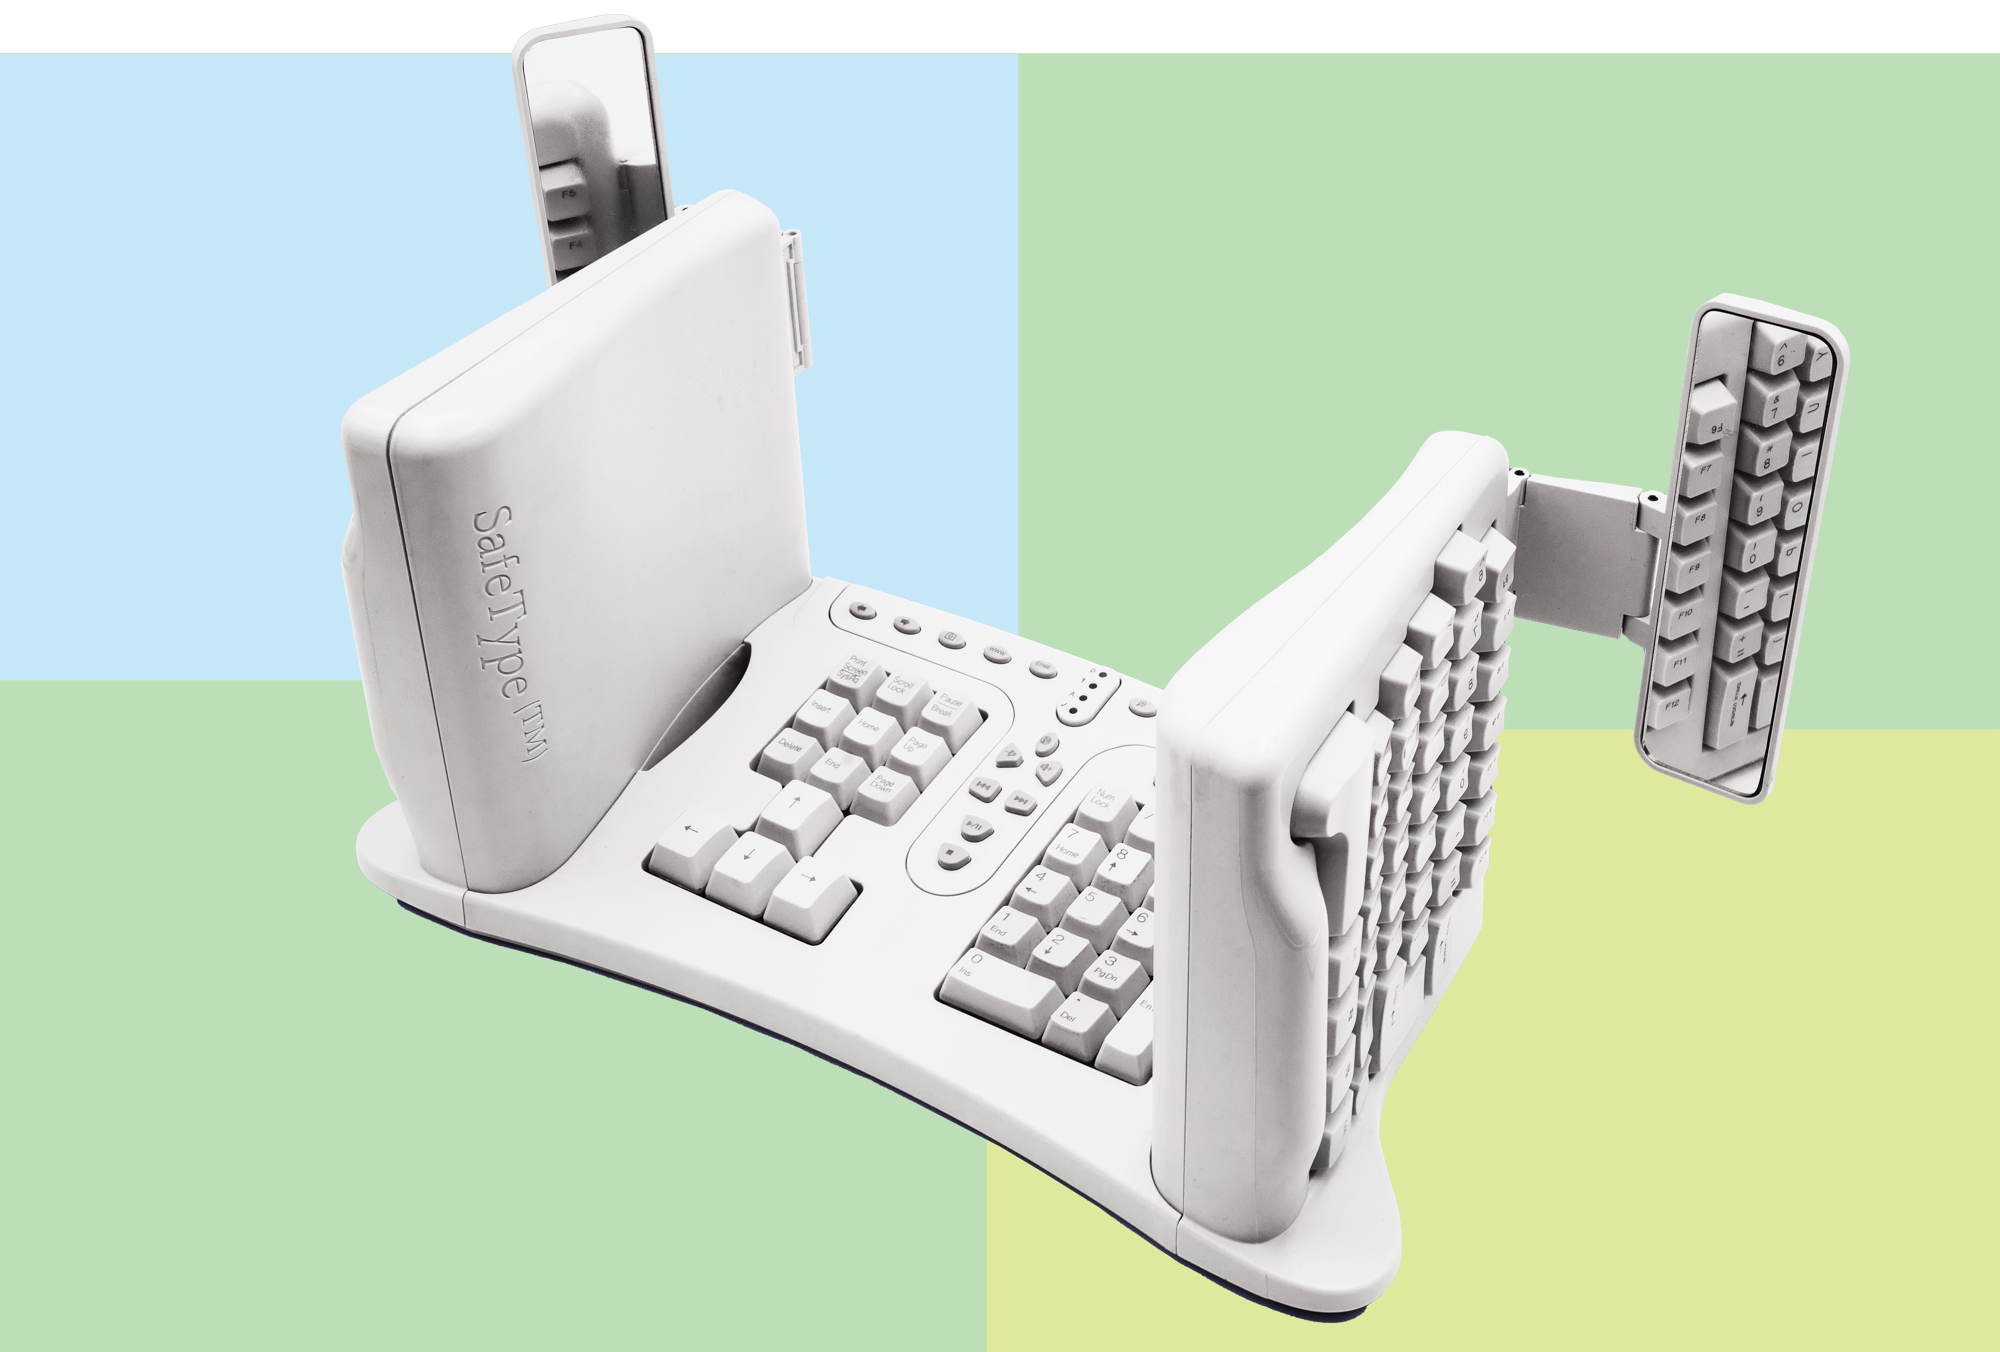 SafeType three quarters keyboard with side mirrors